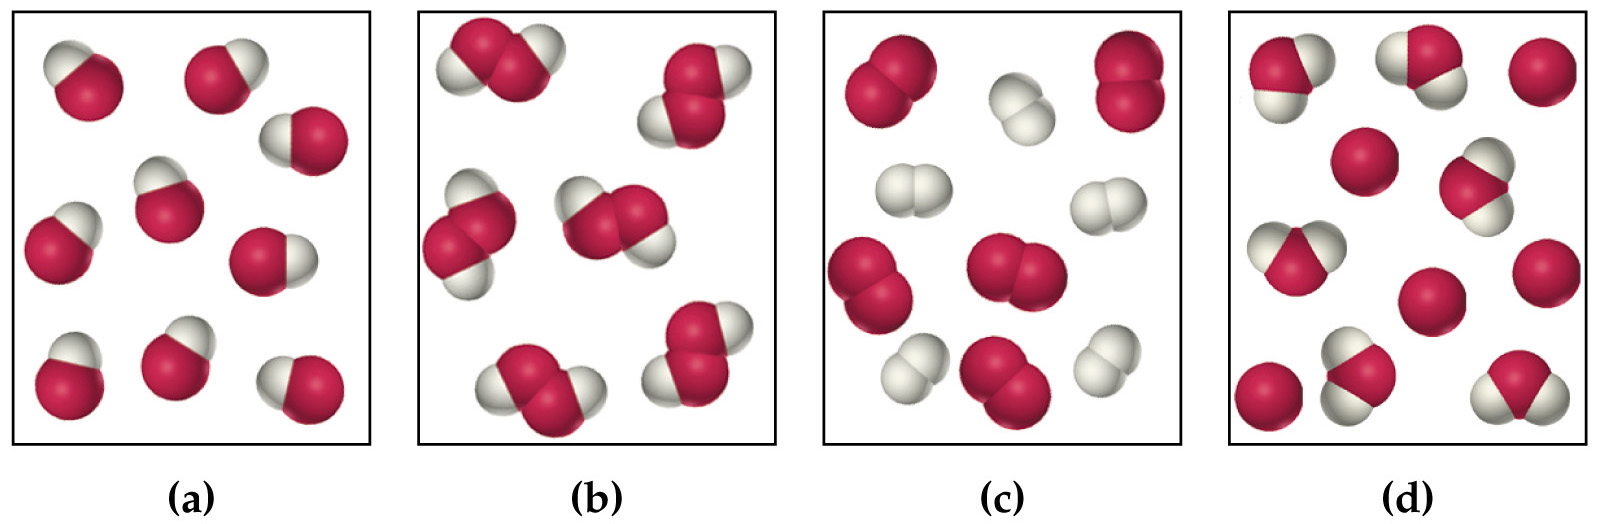 Compounds and Mixtures, figure 1